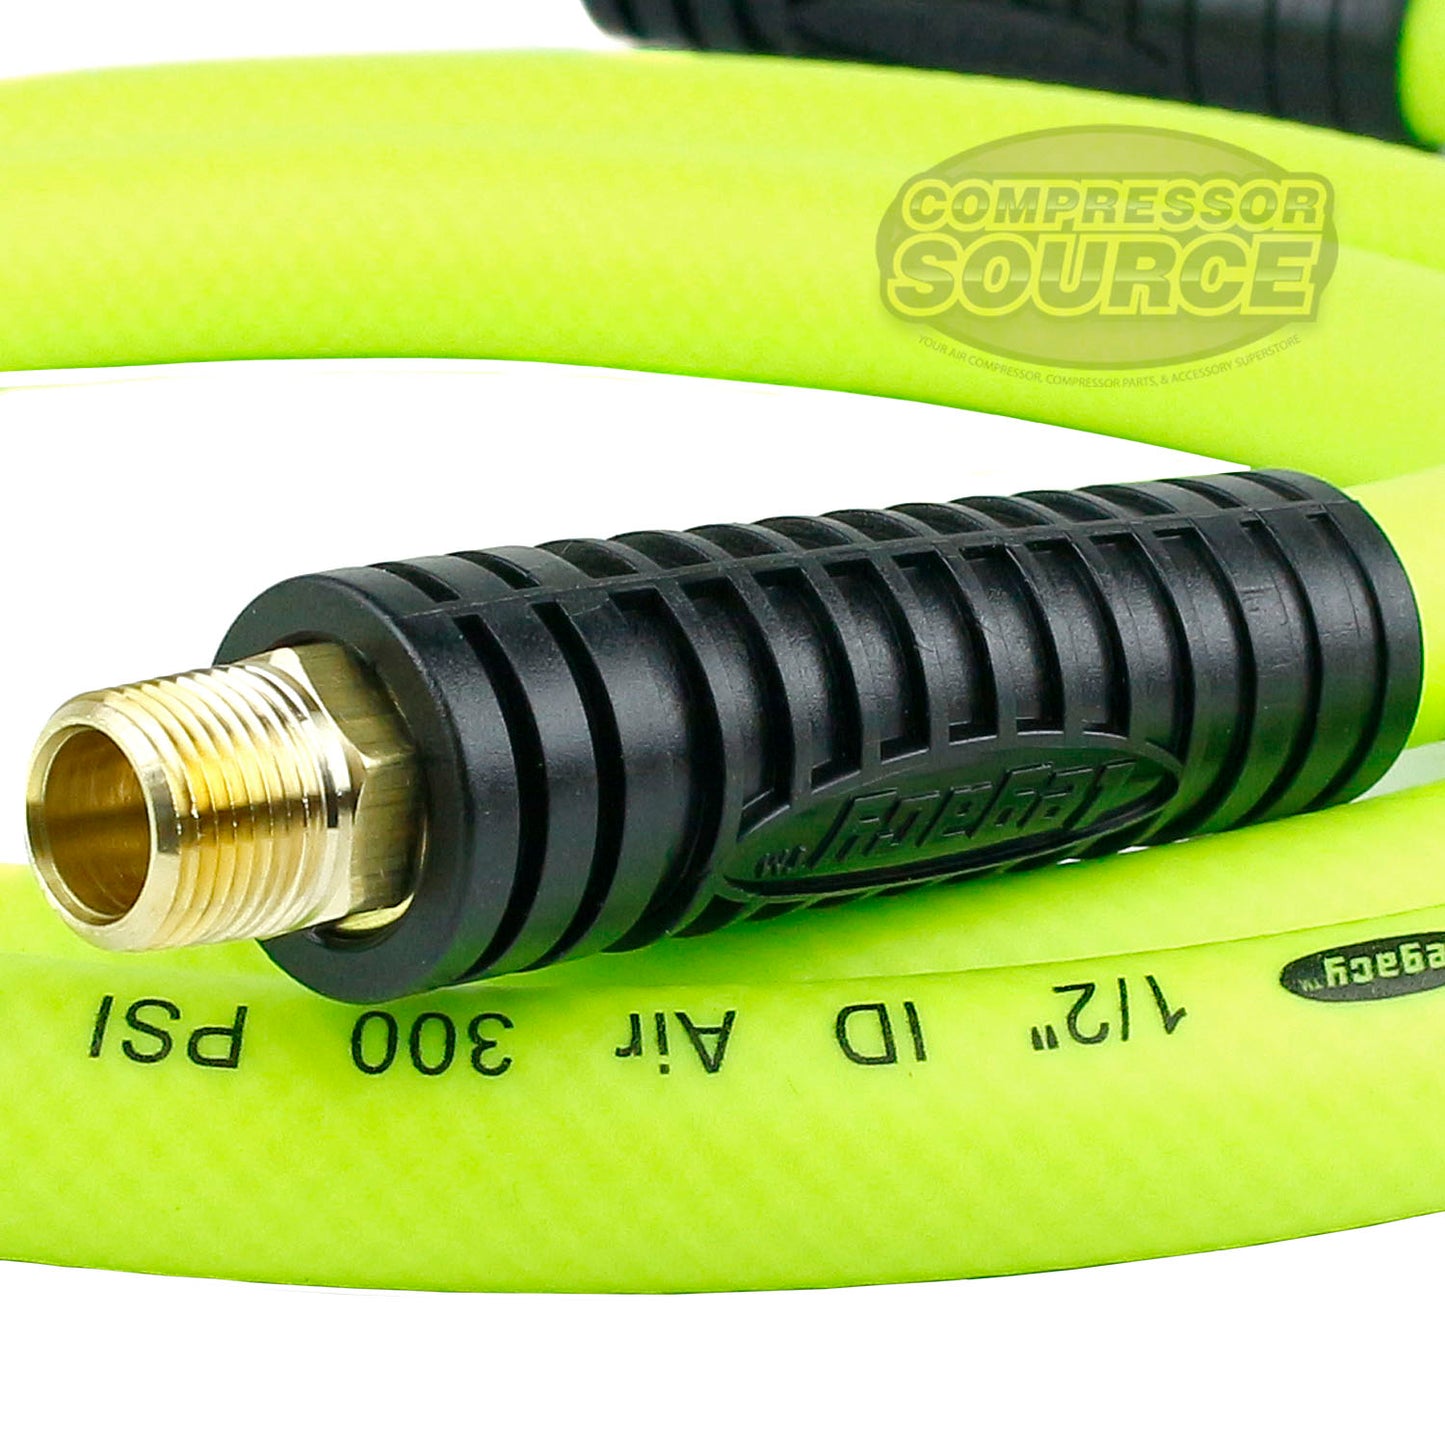 Flexzilla 1/2" x 6' FT Air Hose Whip With 3/8' MNPT Swivel HFZ1206YW3S